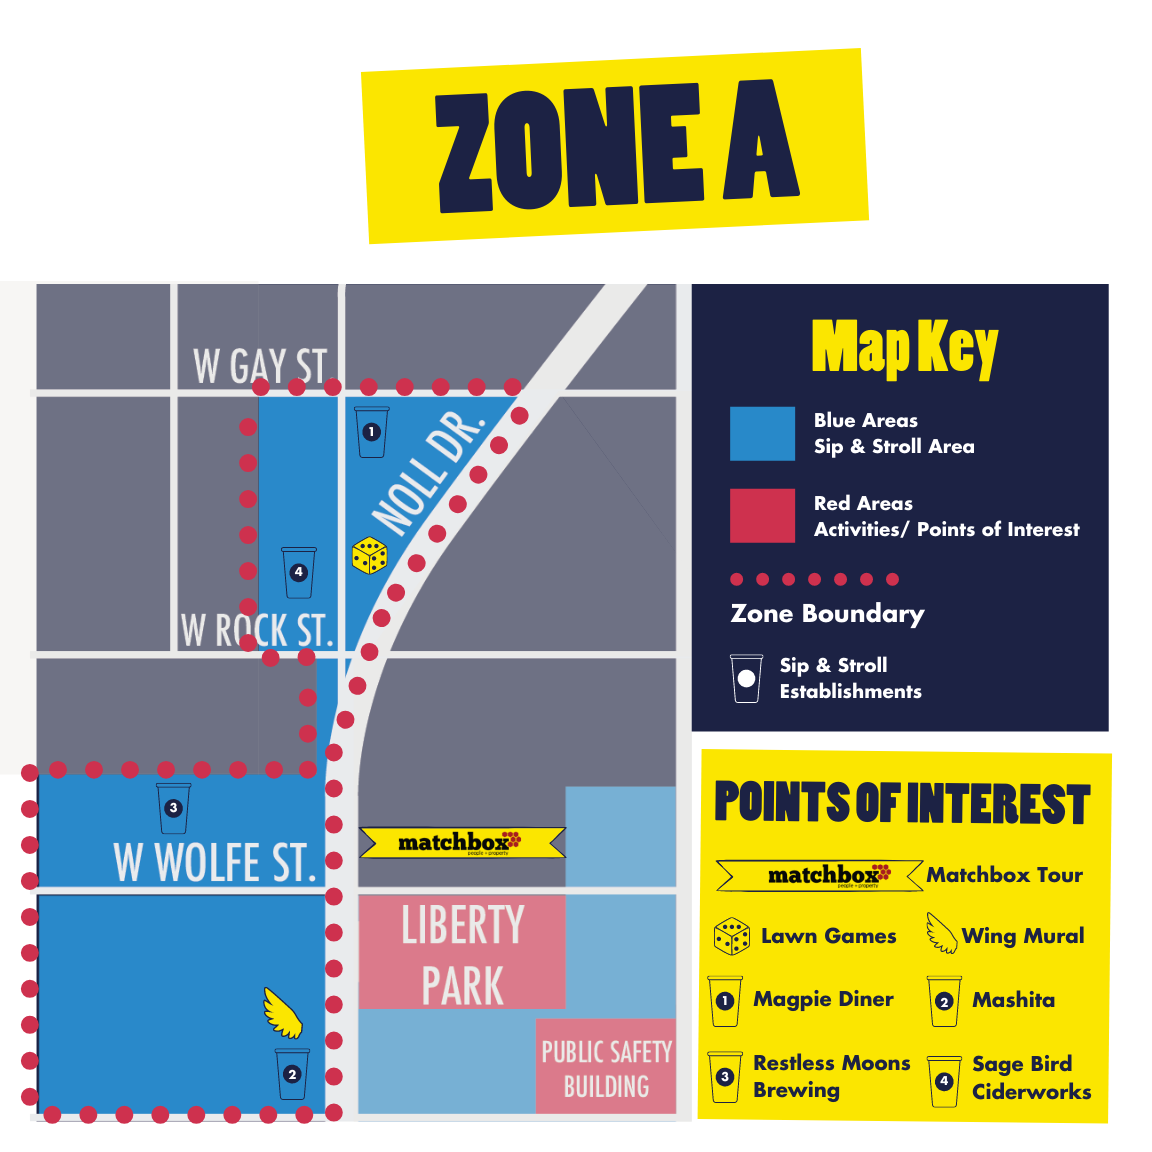 Zone A Map